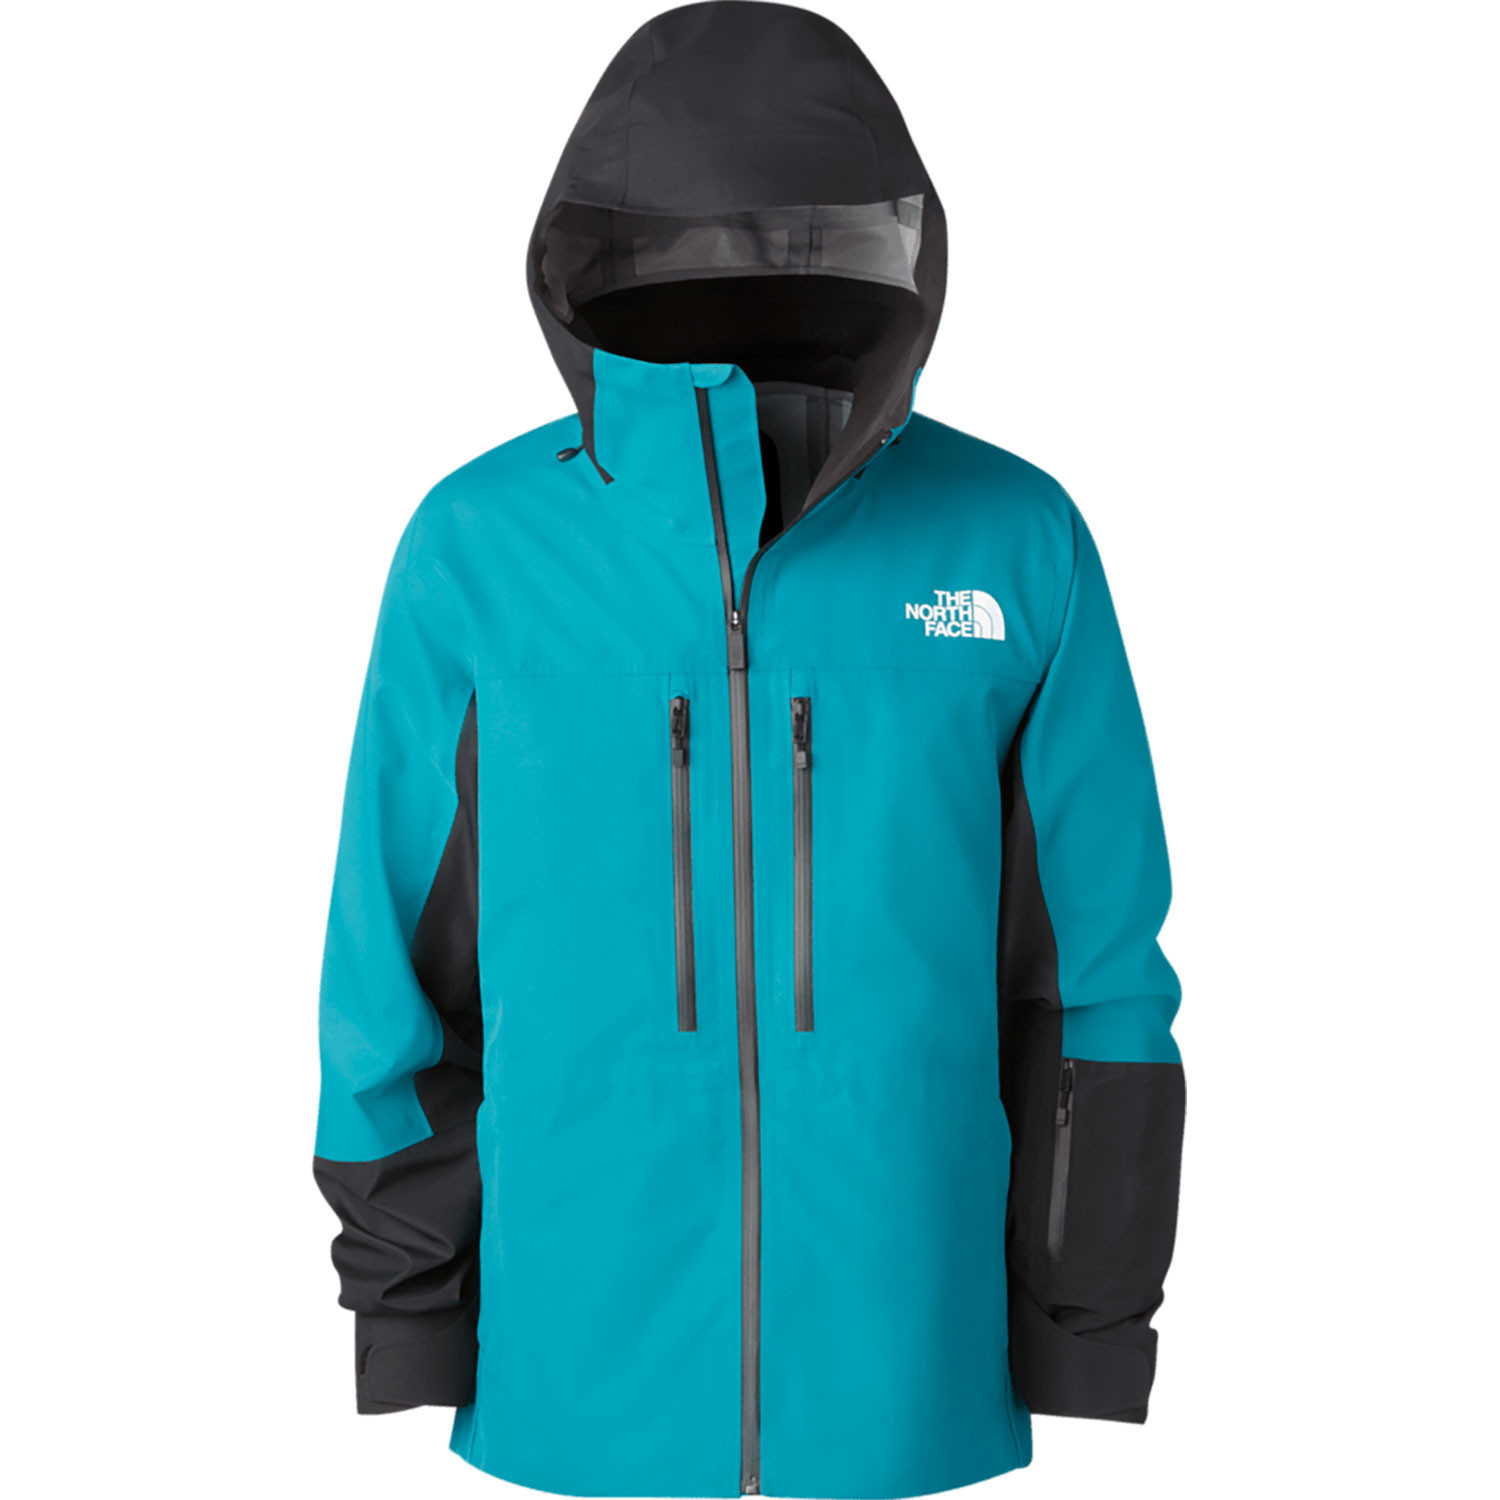 The North Face Ceptor Jacket | The Ski Monster